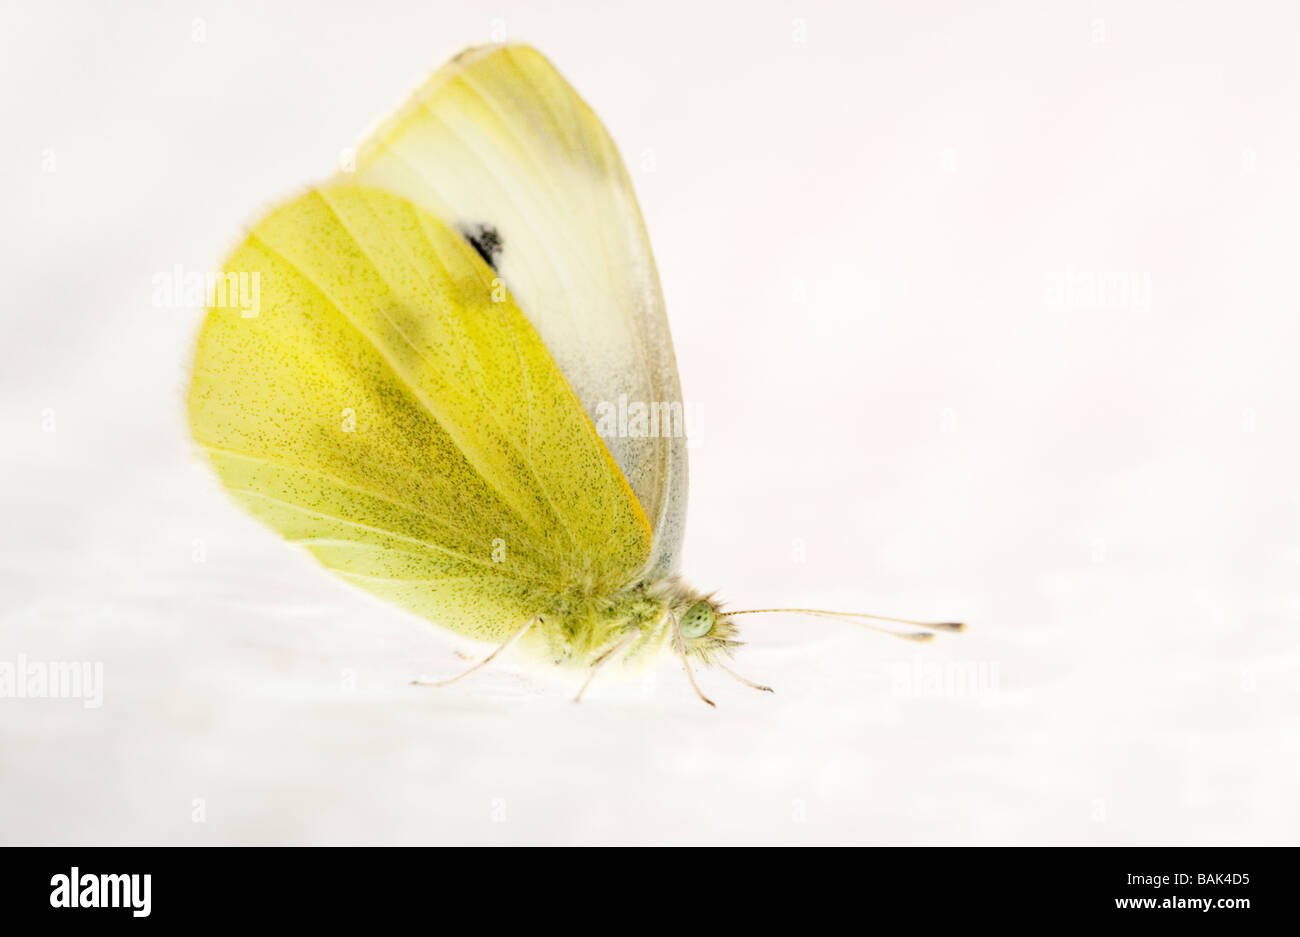 Cabbage White butterfly Stock Photo